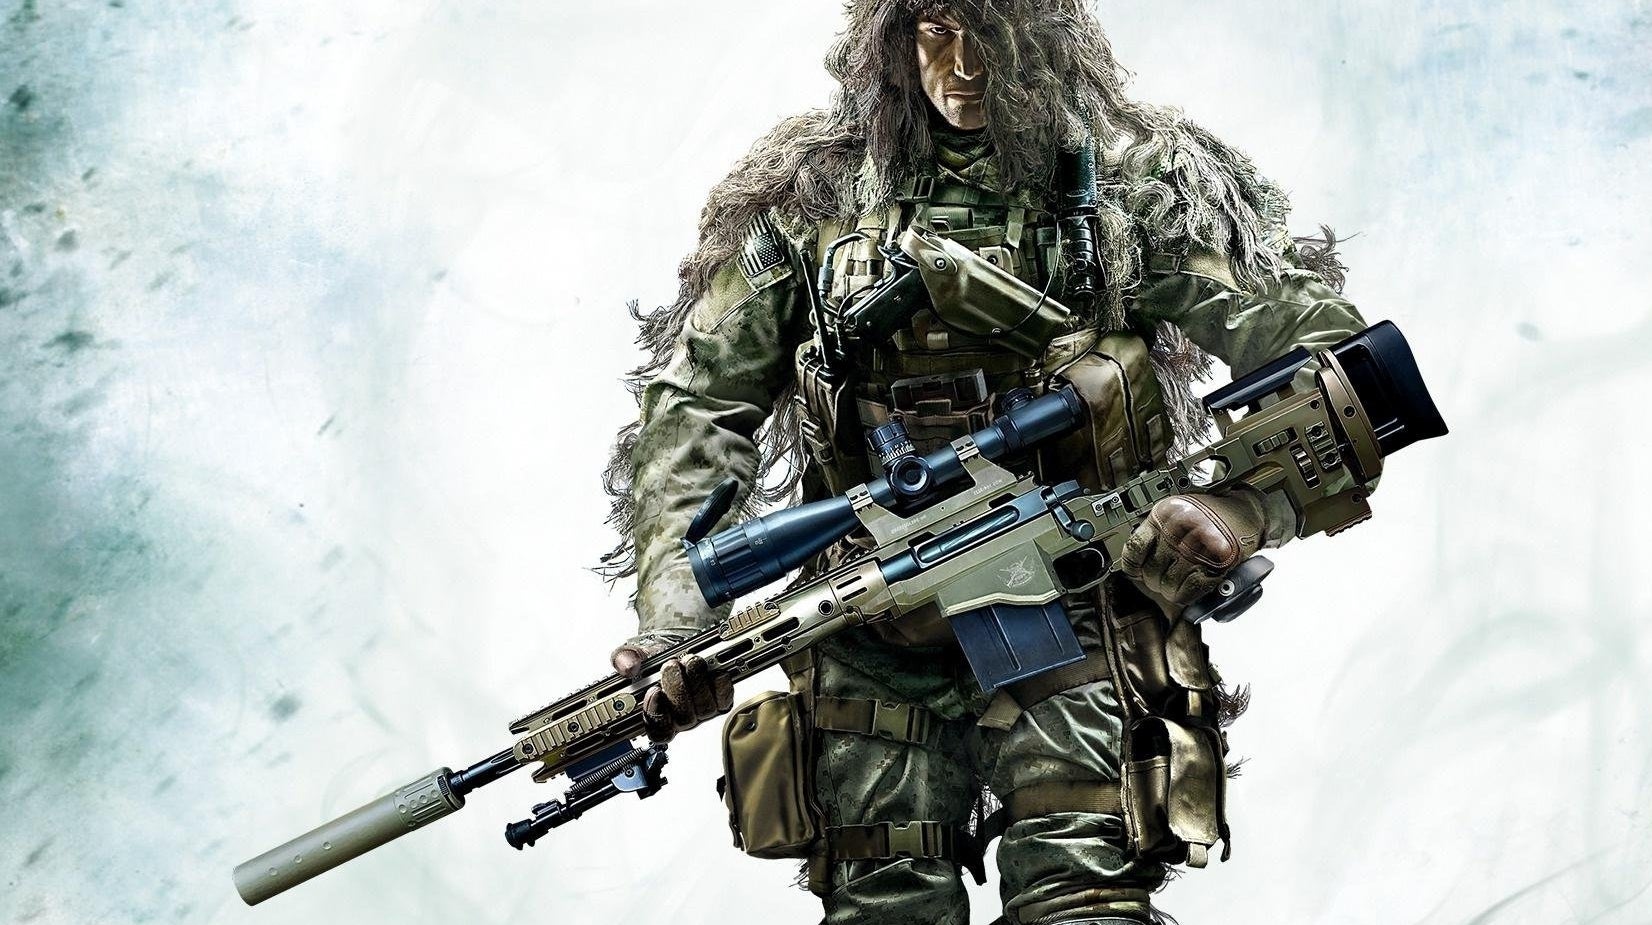 Image for Next Sniper Ghost Warrior game announced